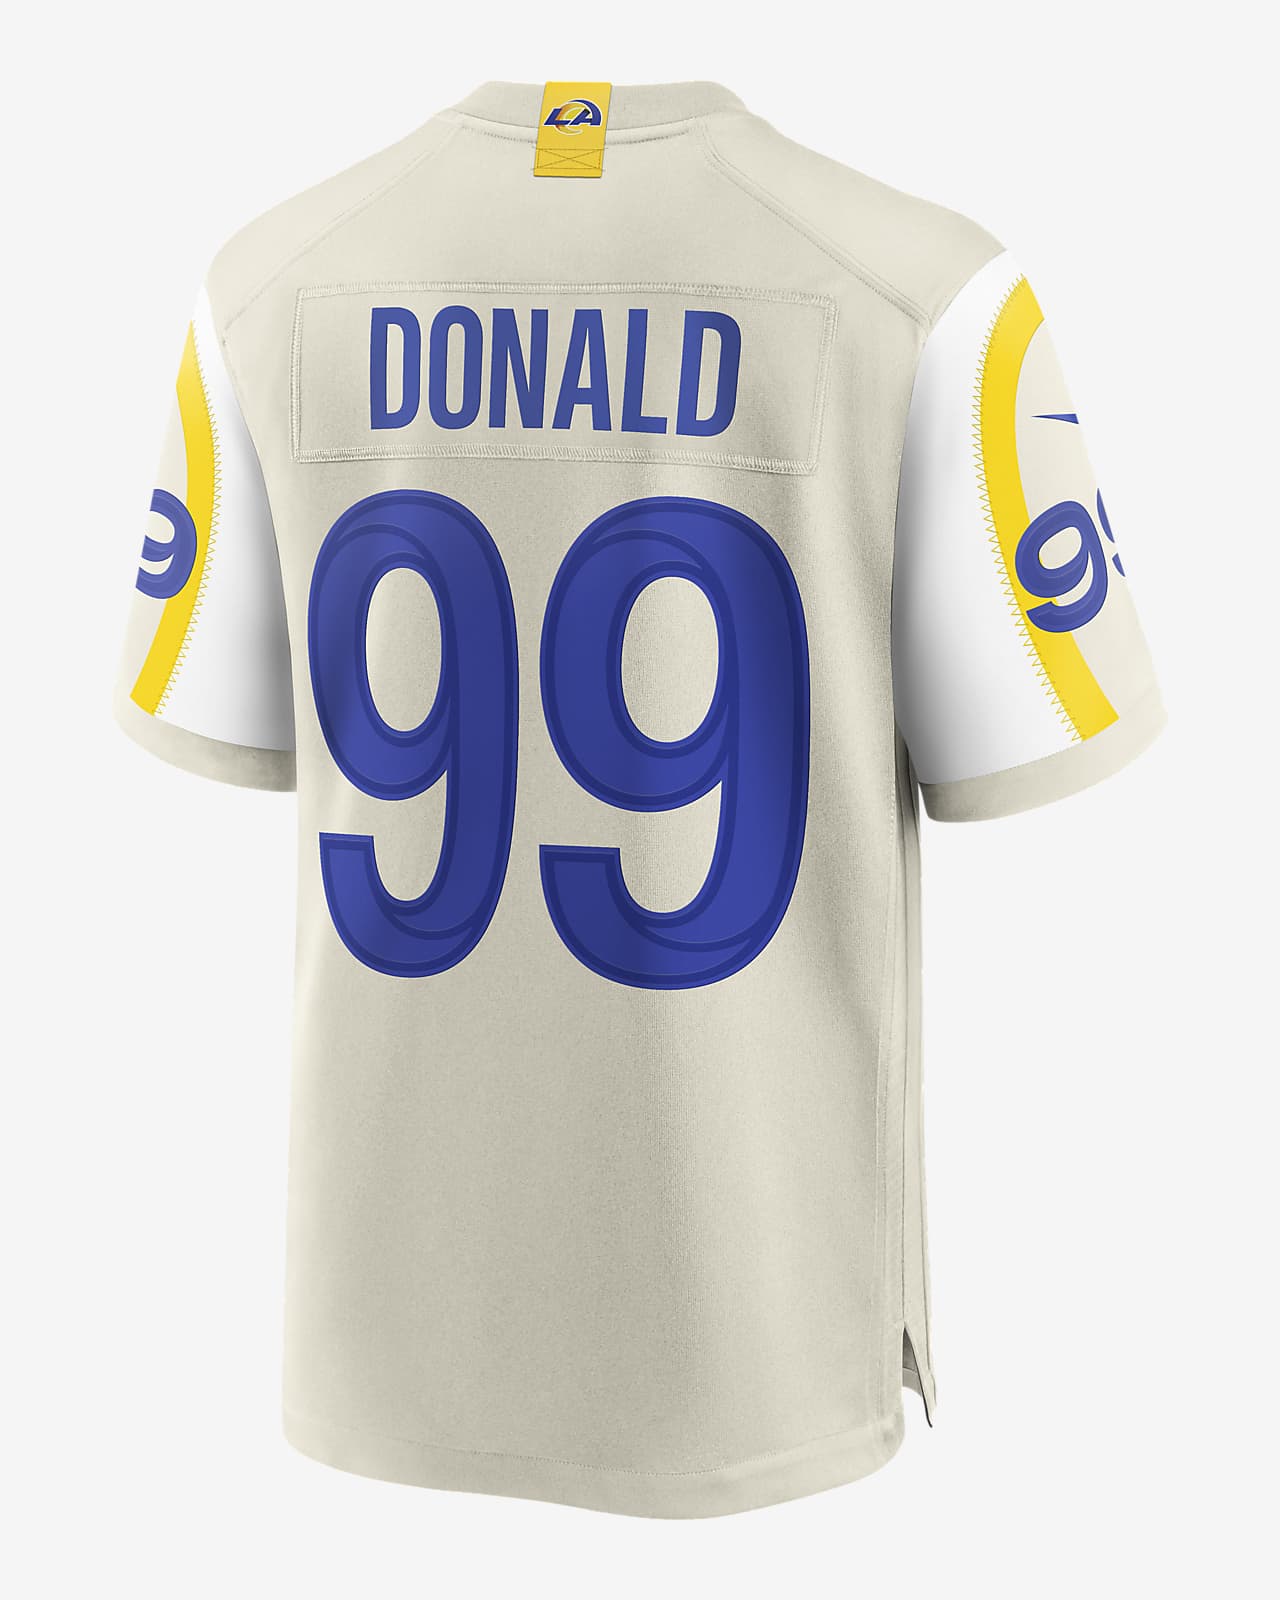 los angeles rams yellow jersey